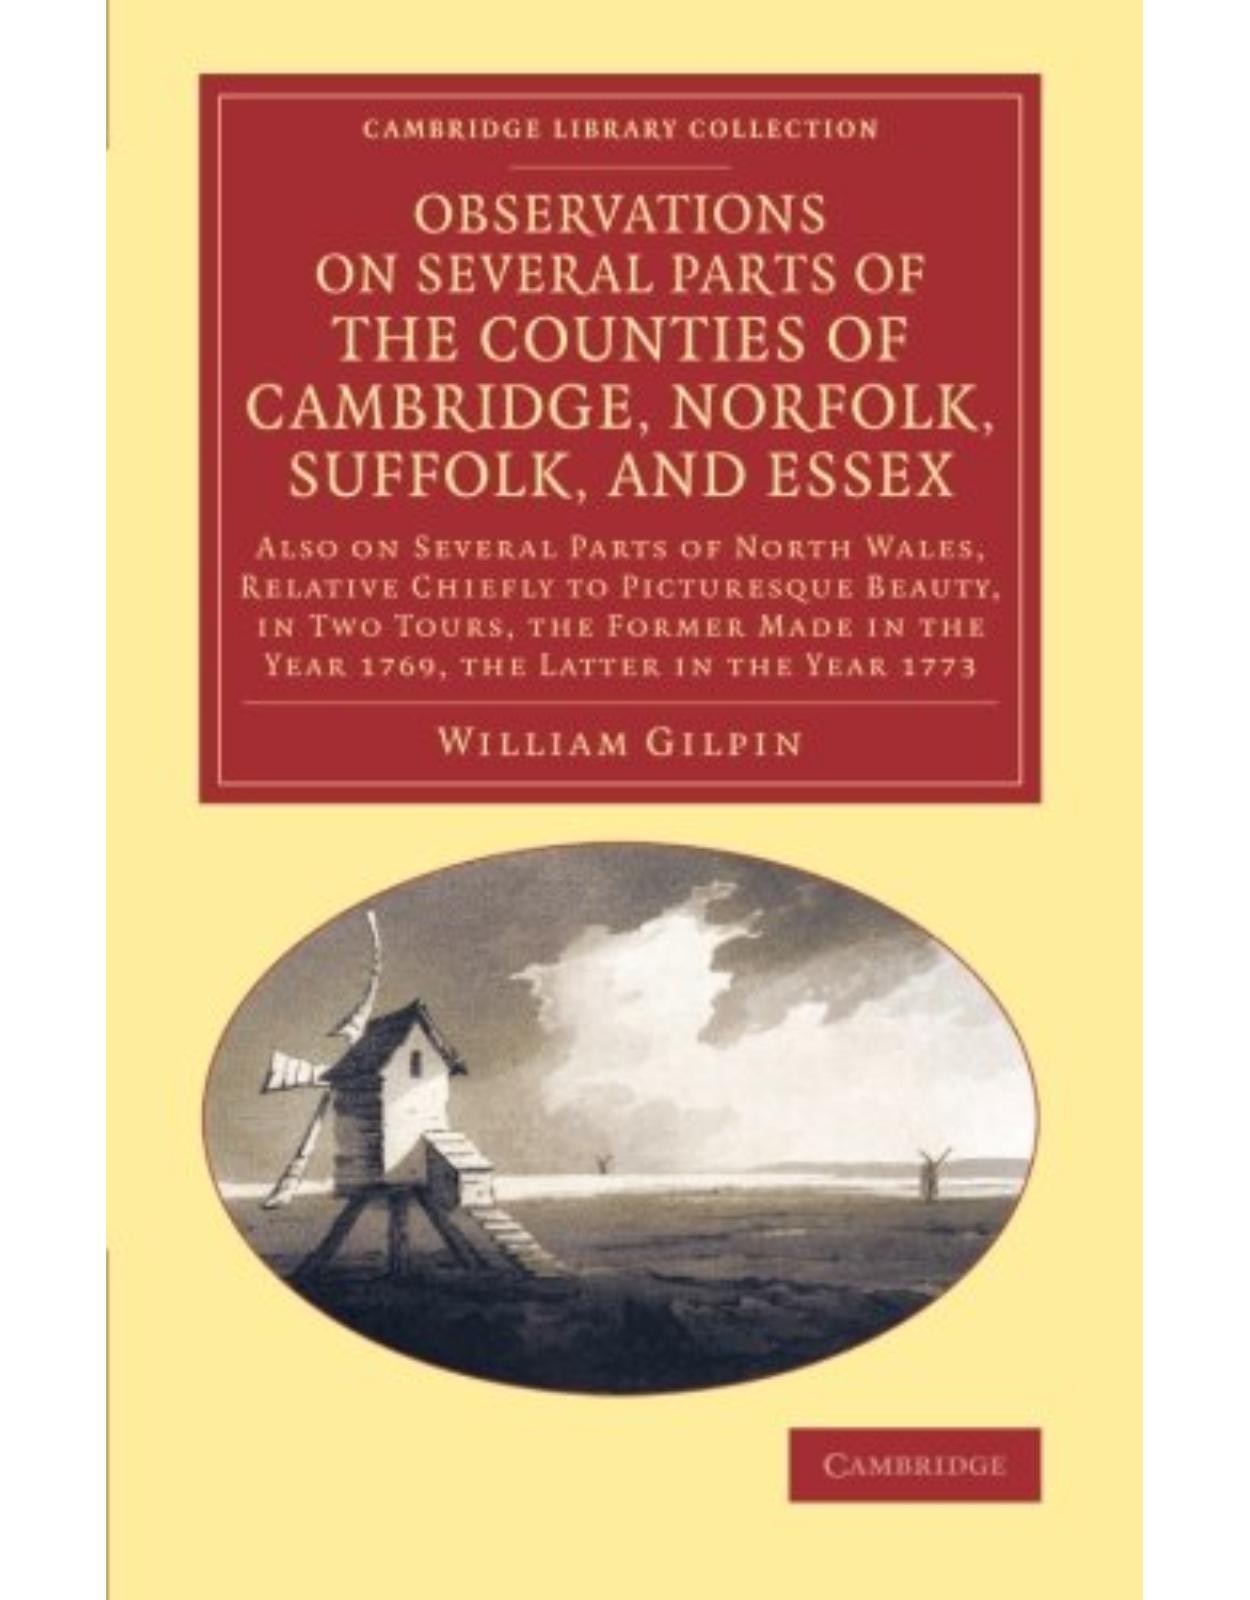 Observations on Several Parts of the Counties of Cambridge, Norfolk, Suffolk, and Essex: Also on Several Parts of North Wales, Relative Chiefly to ... Library Collection - Art and Architecture)